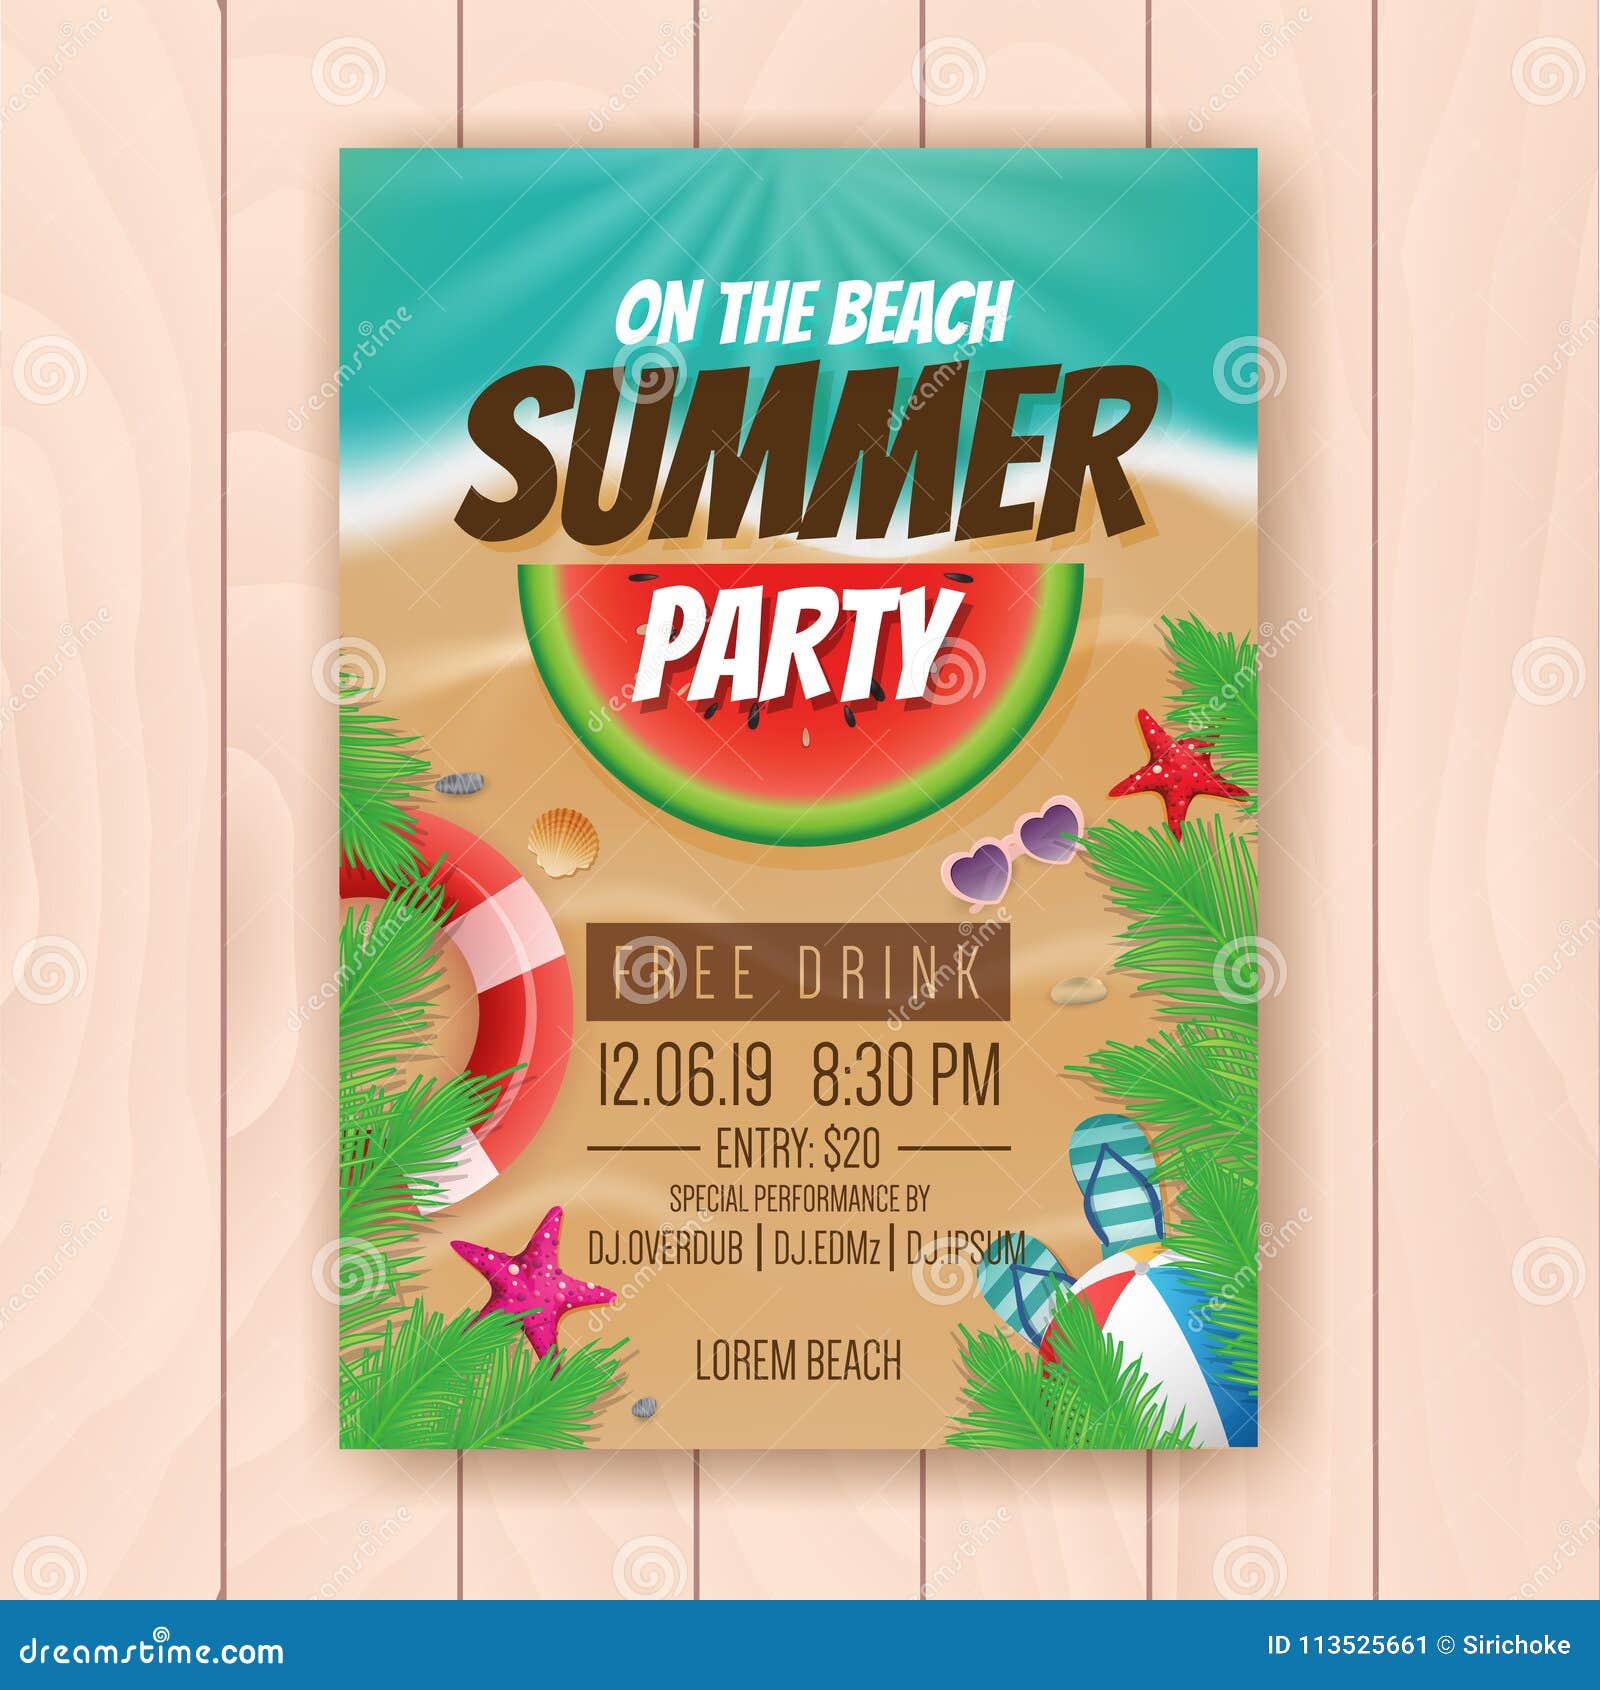 On the Beach Summer Party Advertising Poster Design Stock Vector ...